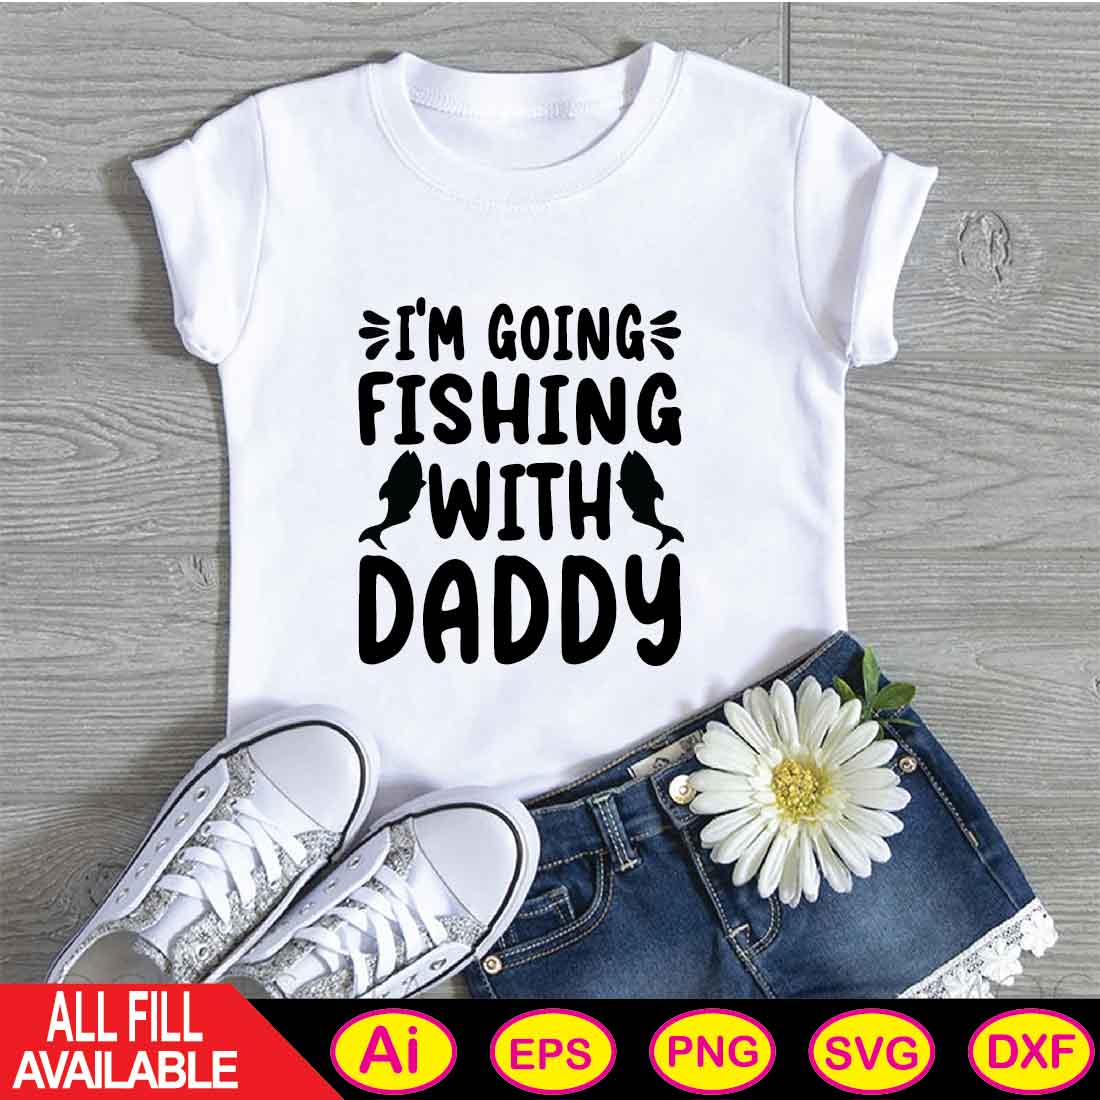 IM GOING FISHING WITH DADDY svg t-shirt cover image.